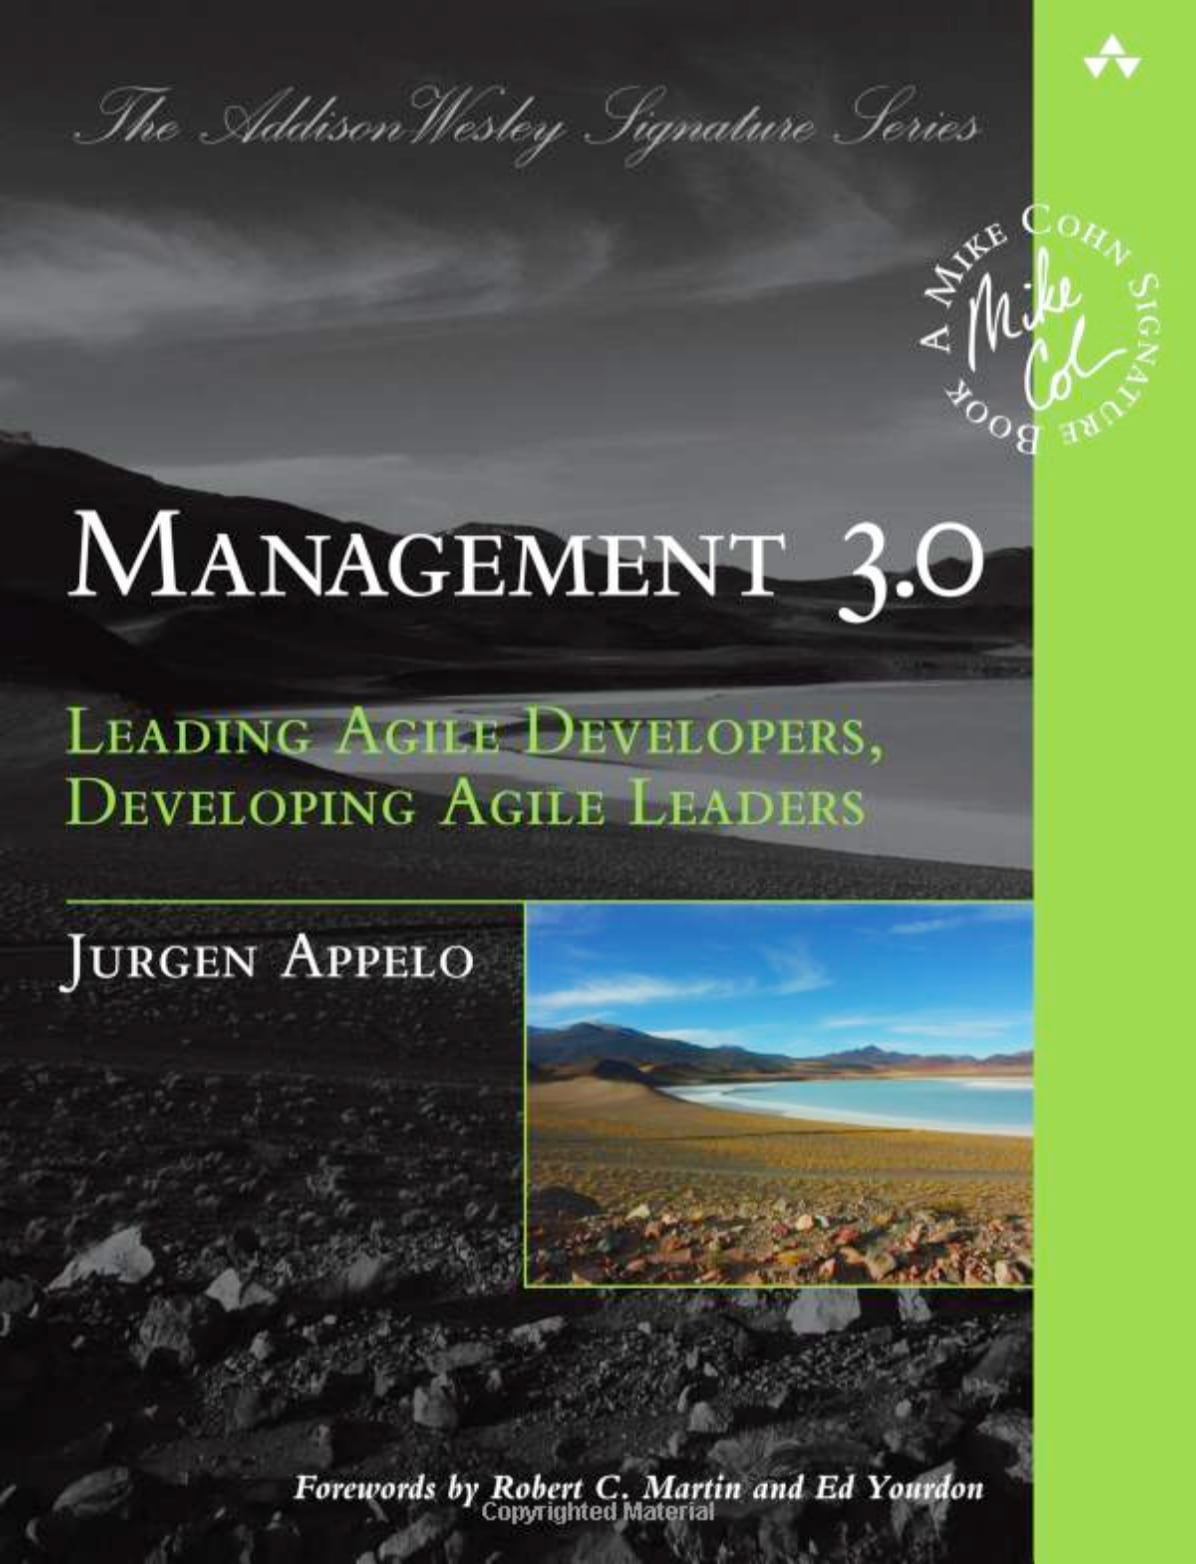 Management 3.0: Leading Agile Developers, Developing Agile Leaders